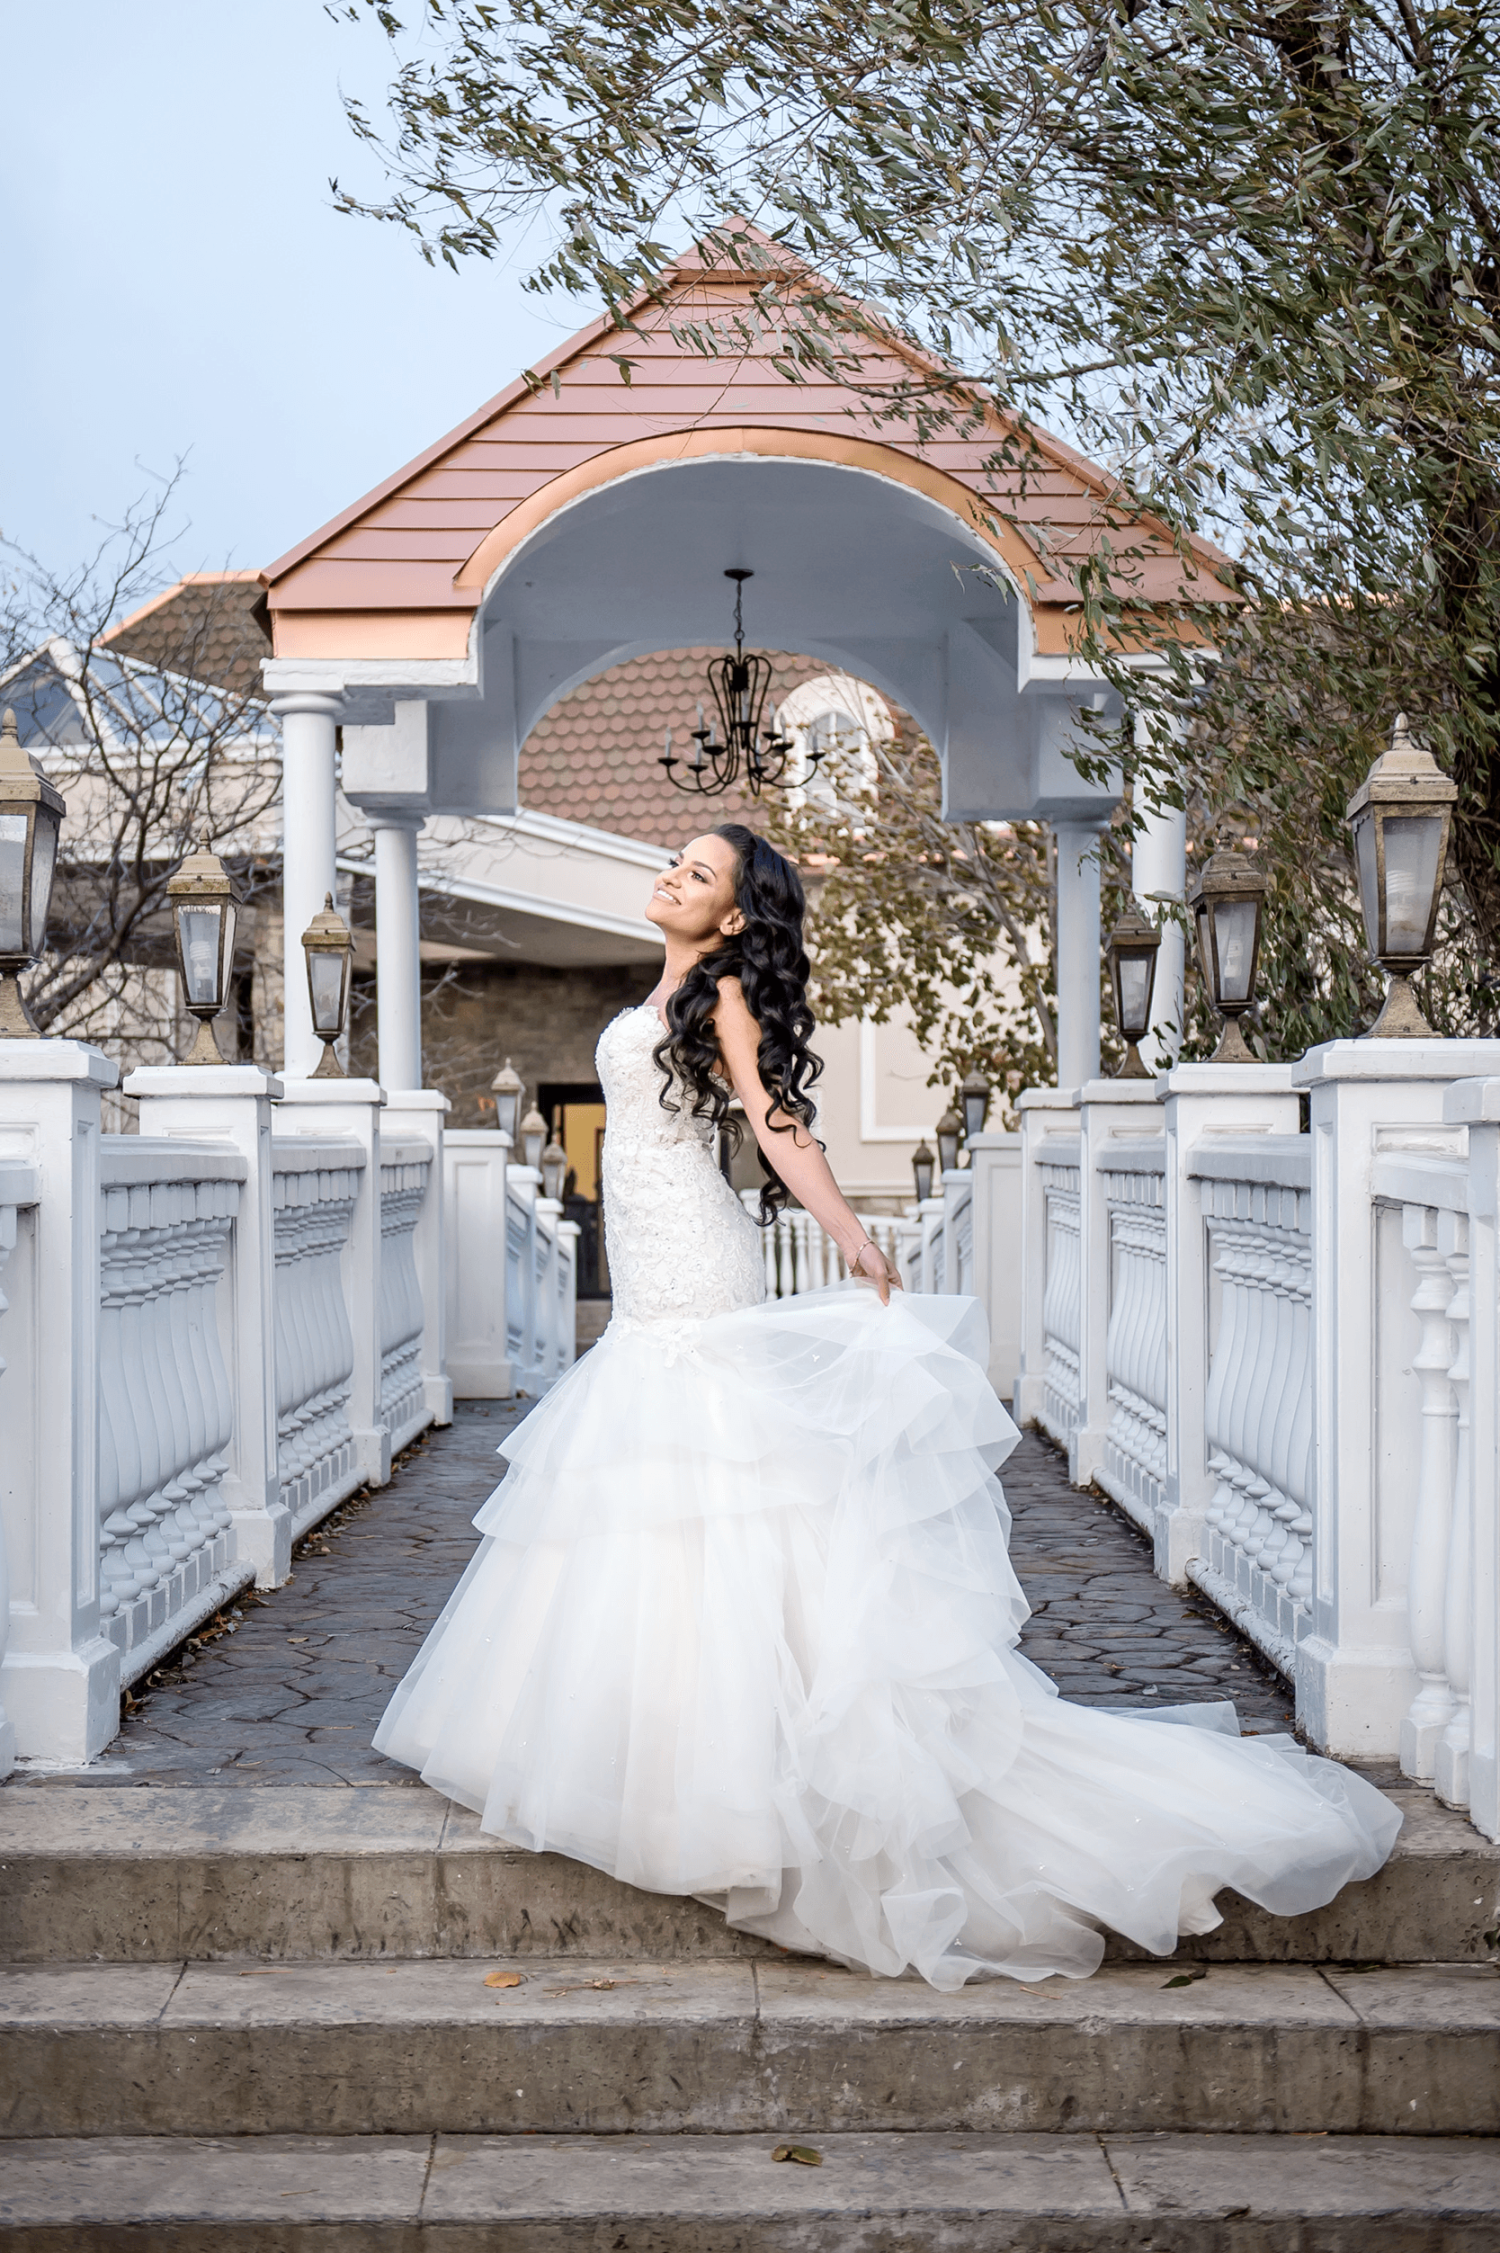 A bride in their wedding dress standing on a bridge with white railing outside at the Paradise Banquet Halls Garden Venue